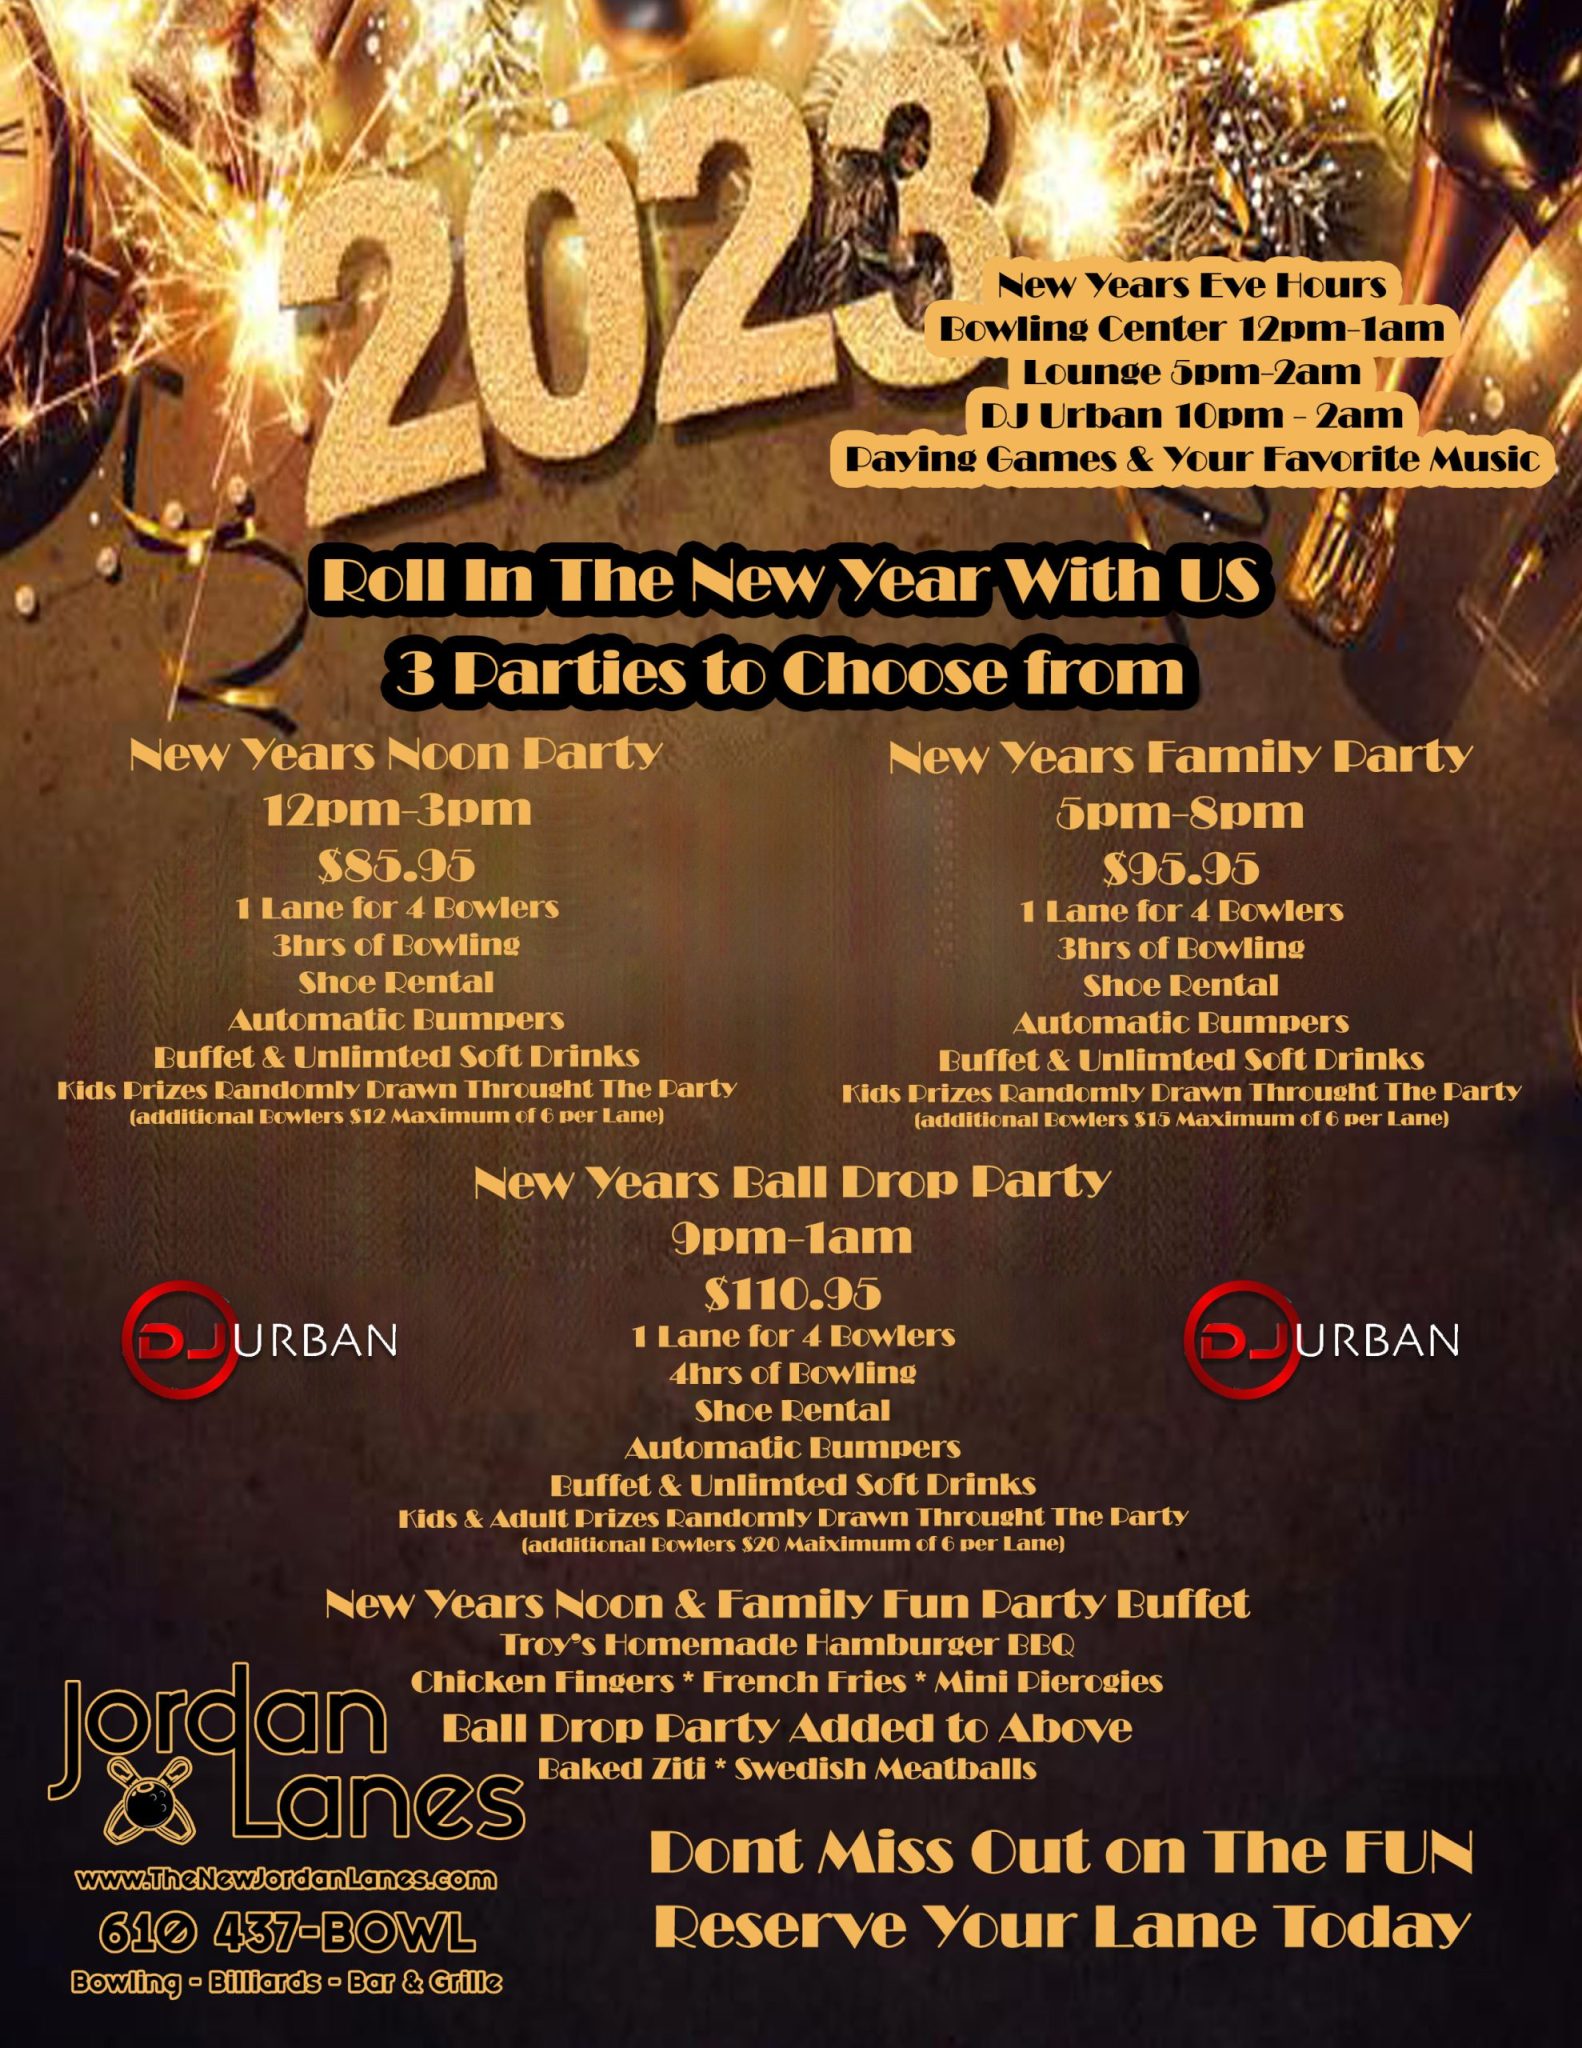 New Years Noon Party @ The New Jordan Lanes